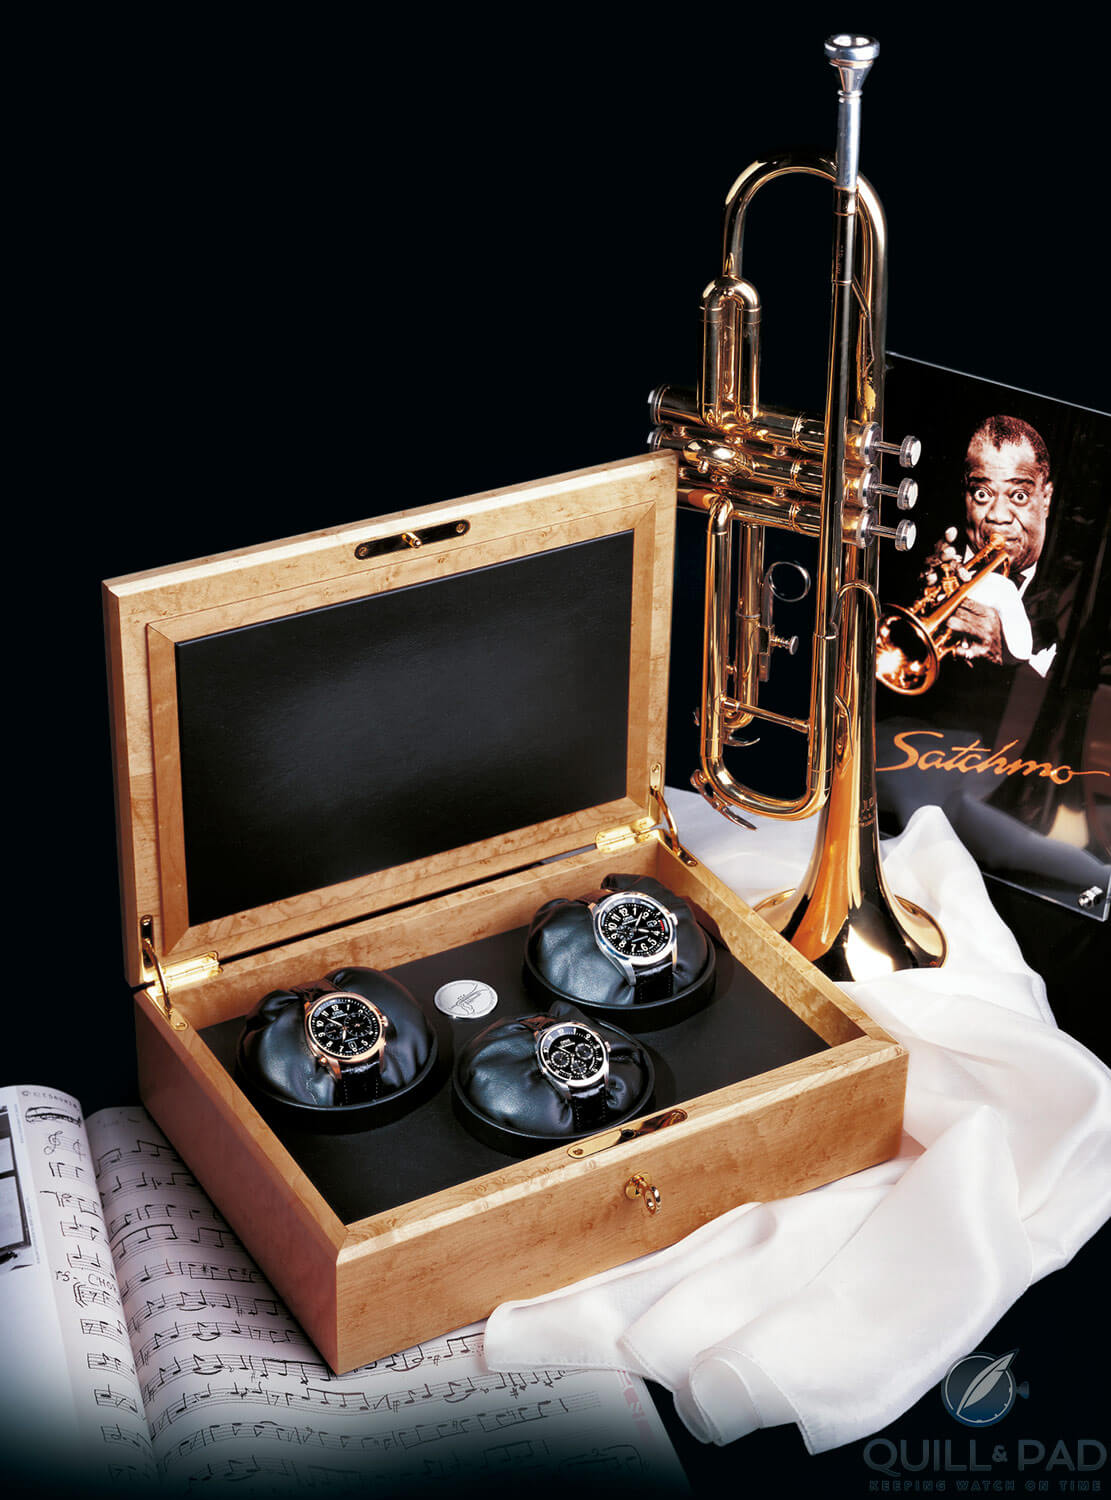 Oris’ Louis Armstrong collector’s edition of three watches from 2000 in honor of Satchmo’s 100th birthday